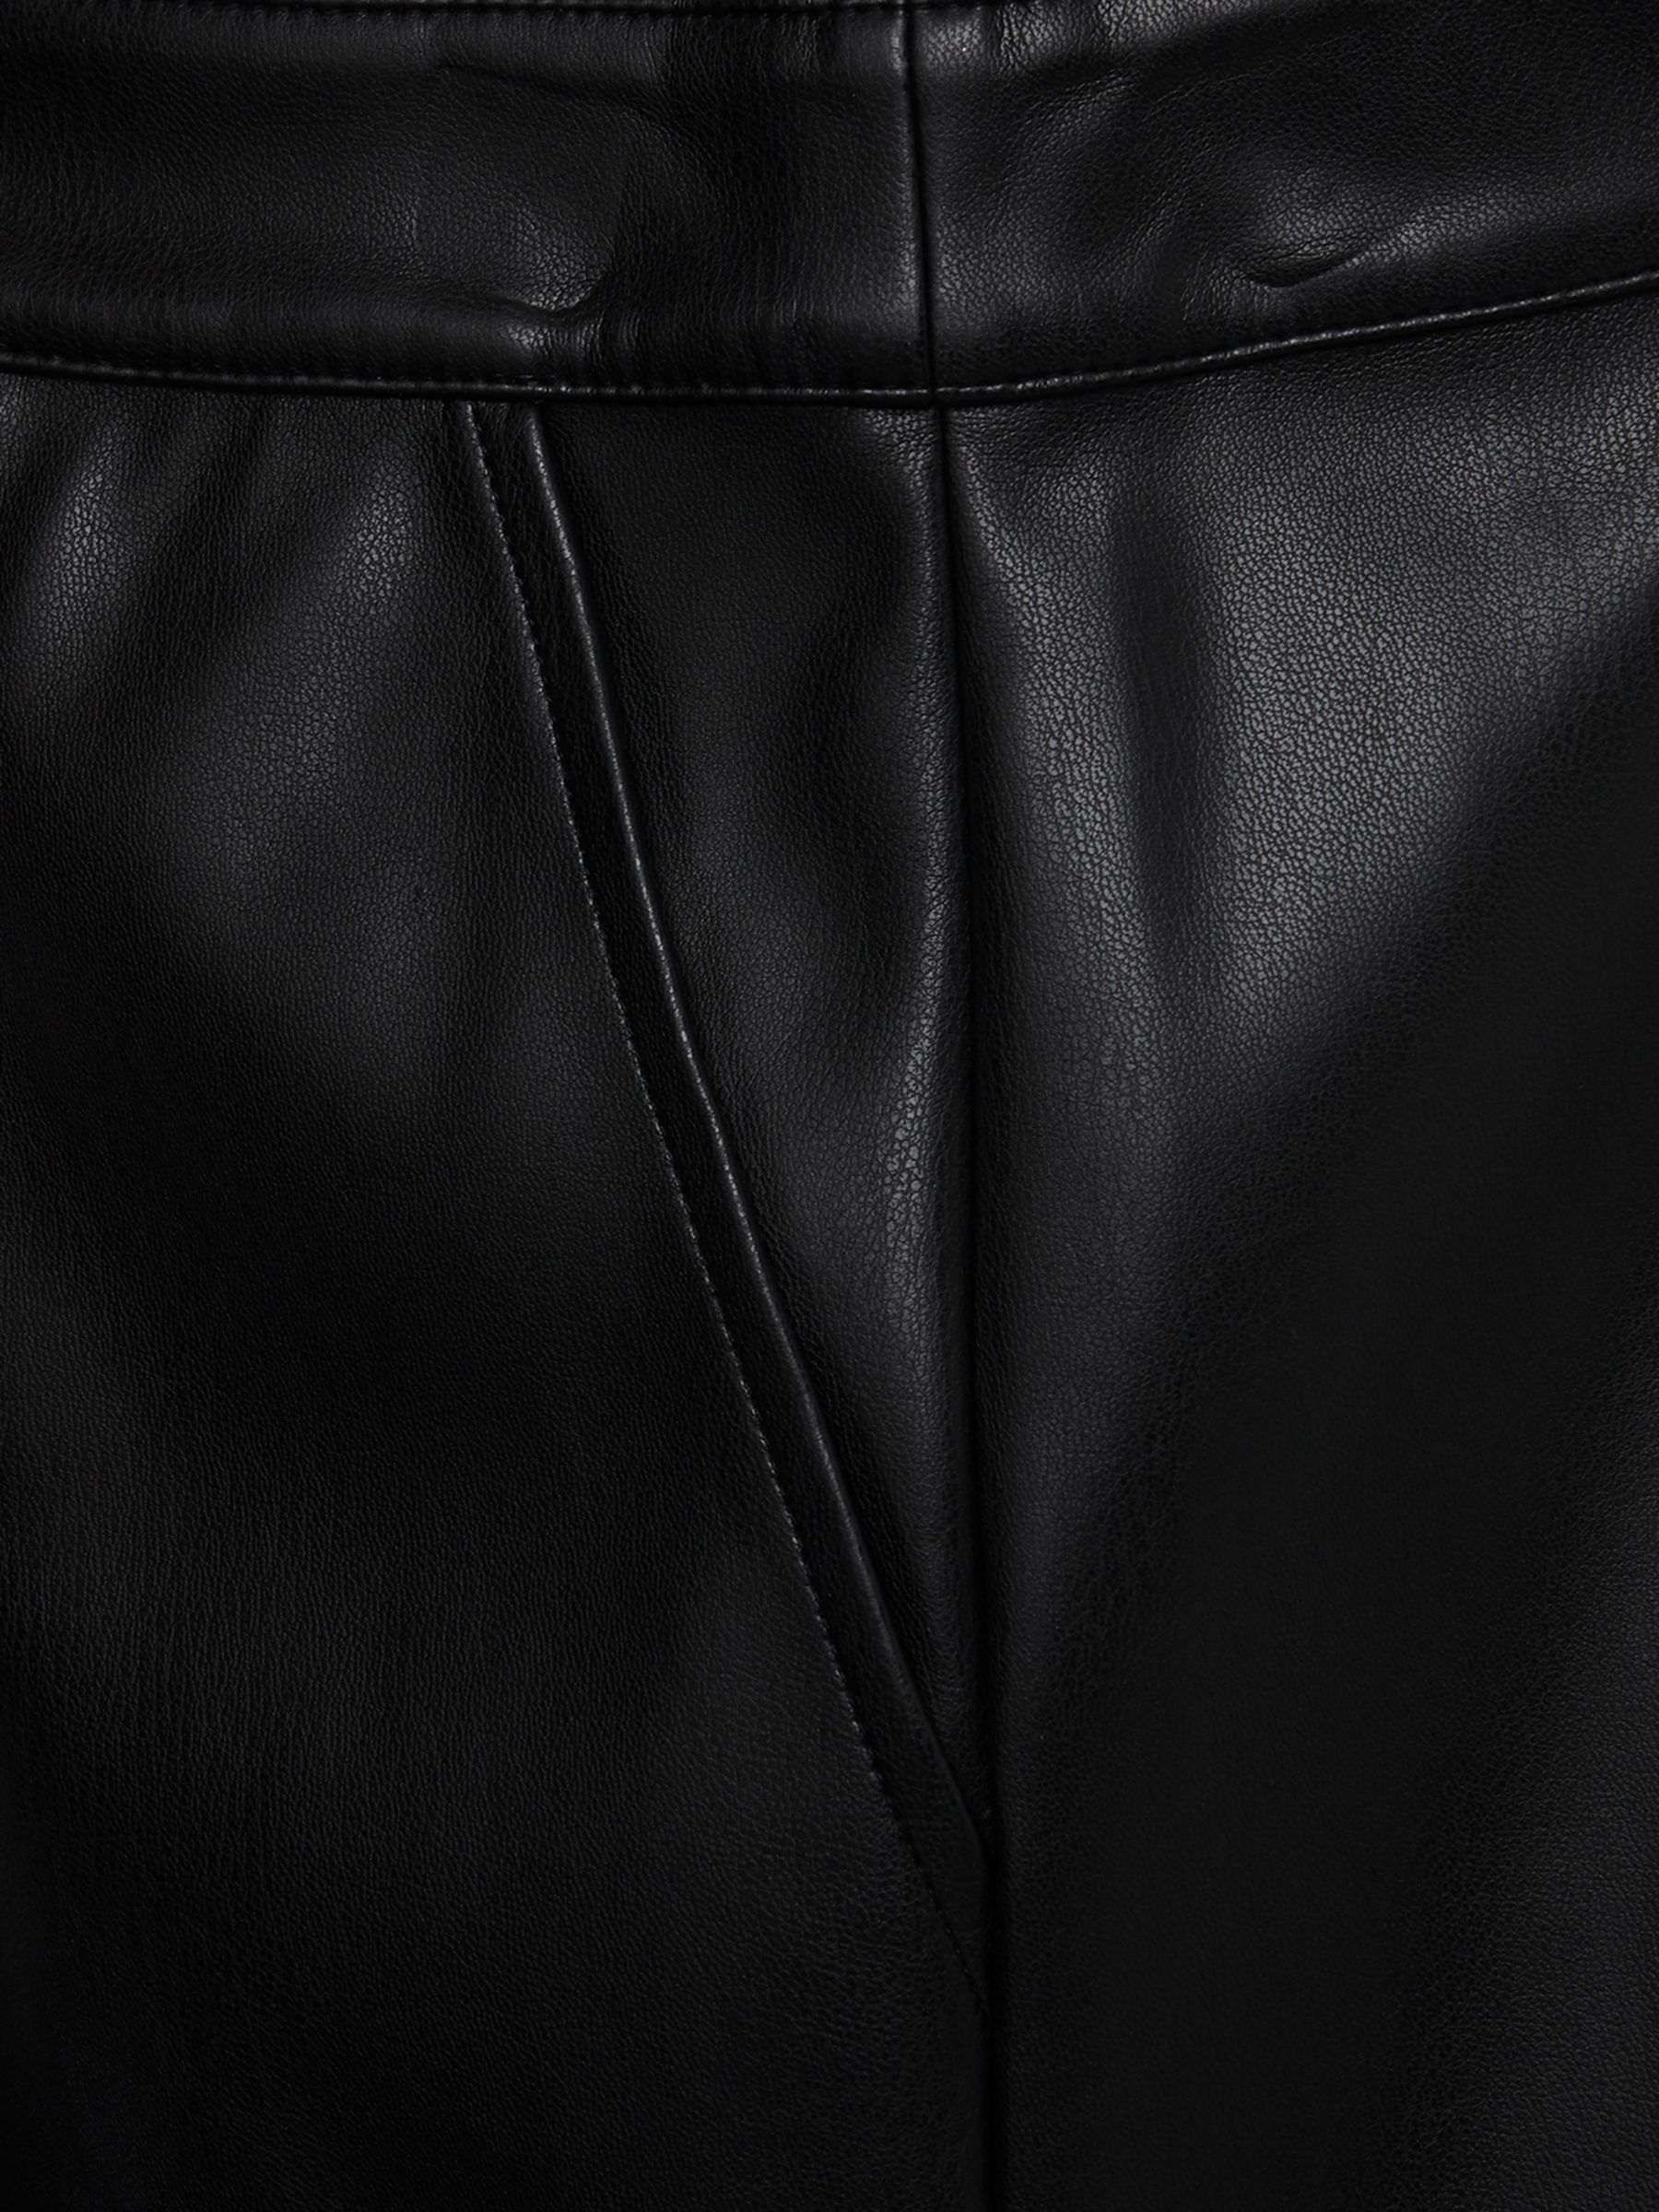 Phase Eight Hadley Faux Leather Shorts, Black at John Lewis & Partners